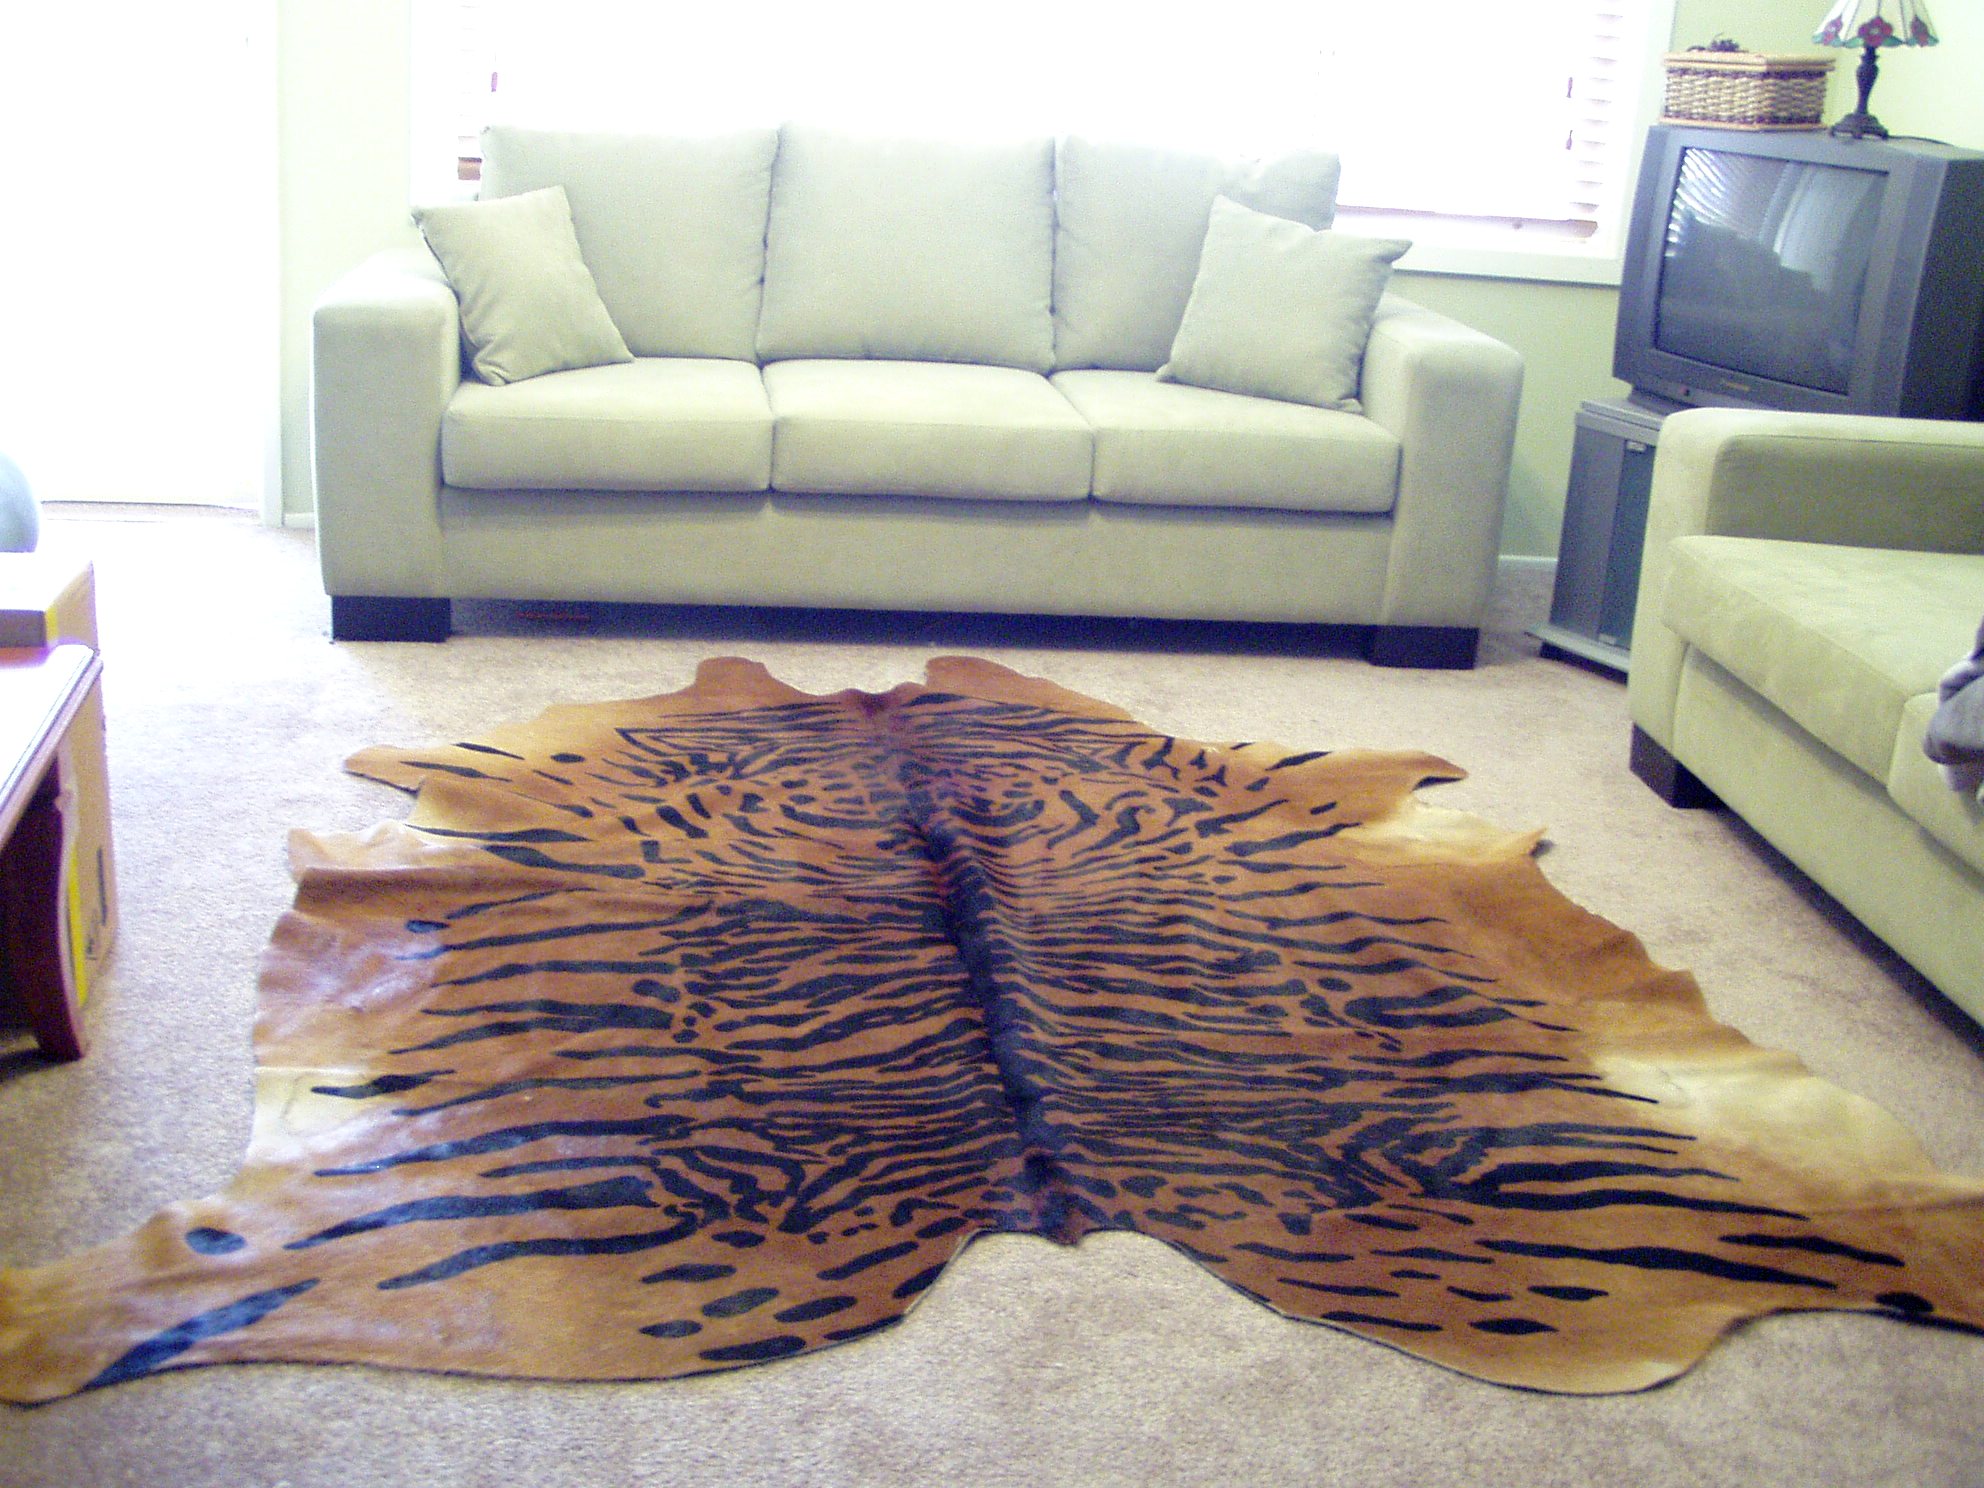 THE LUXURIOUS BENGAL TIGER HAIR ON COWHIDE RUG : $400